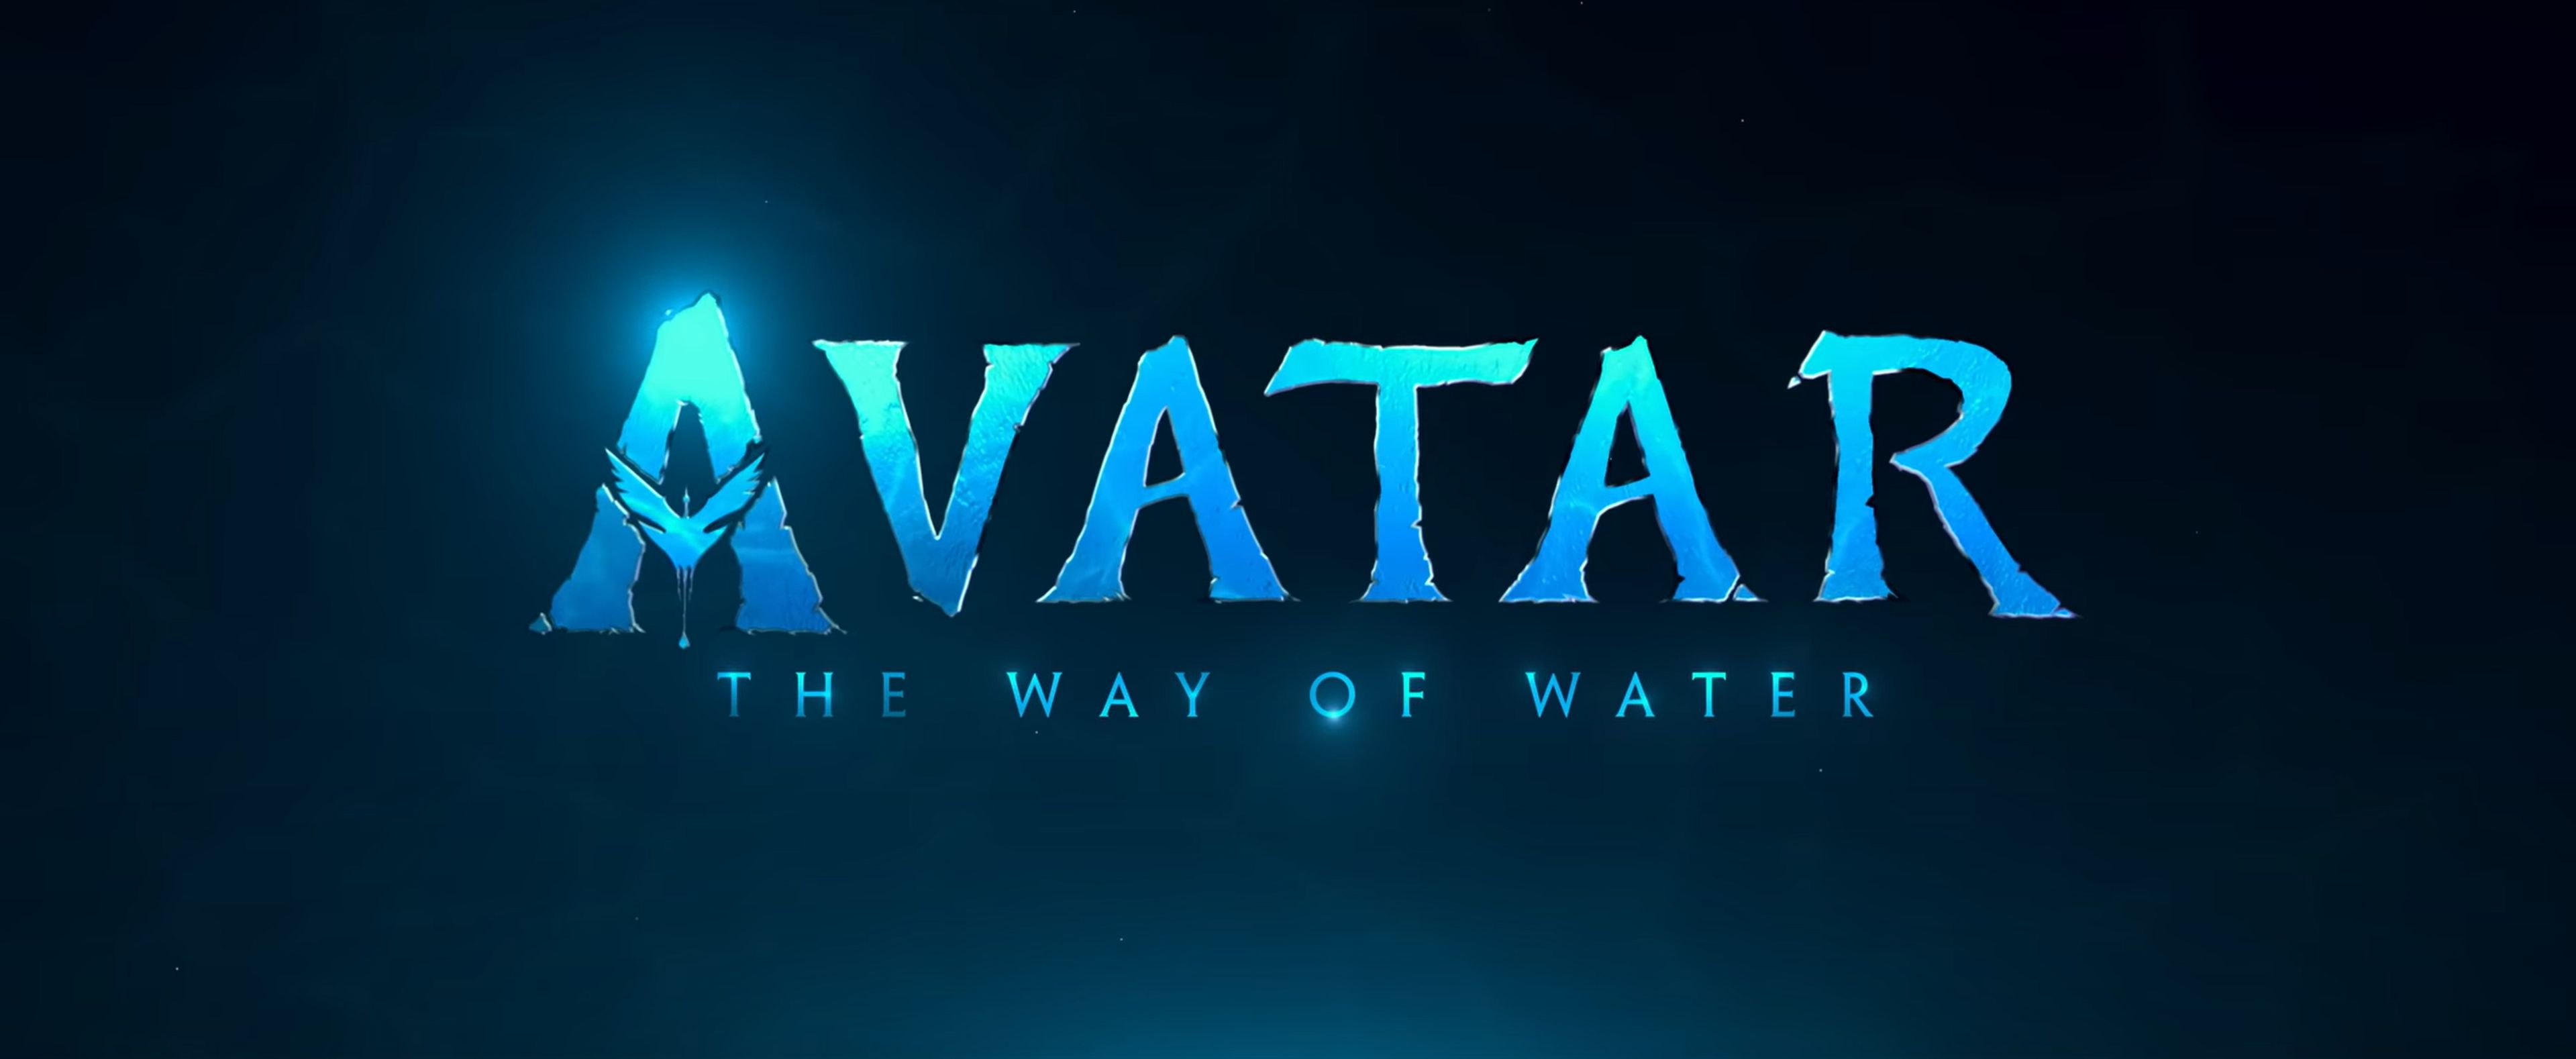 Avatar: The Way of wATER